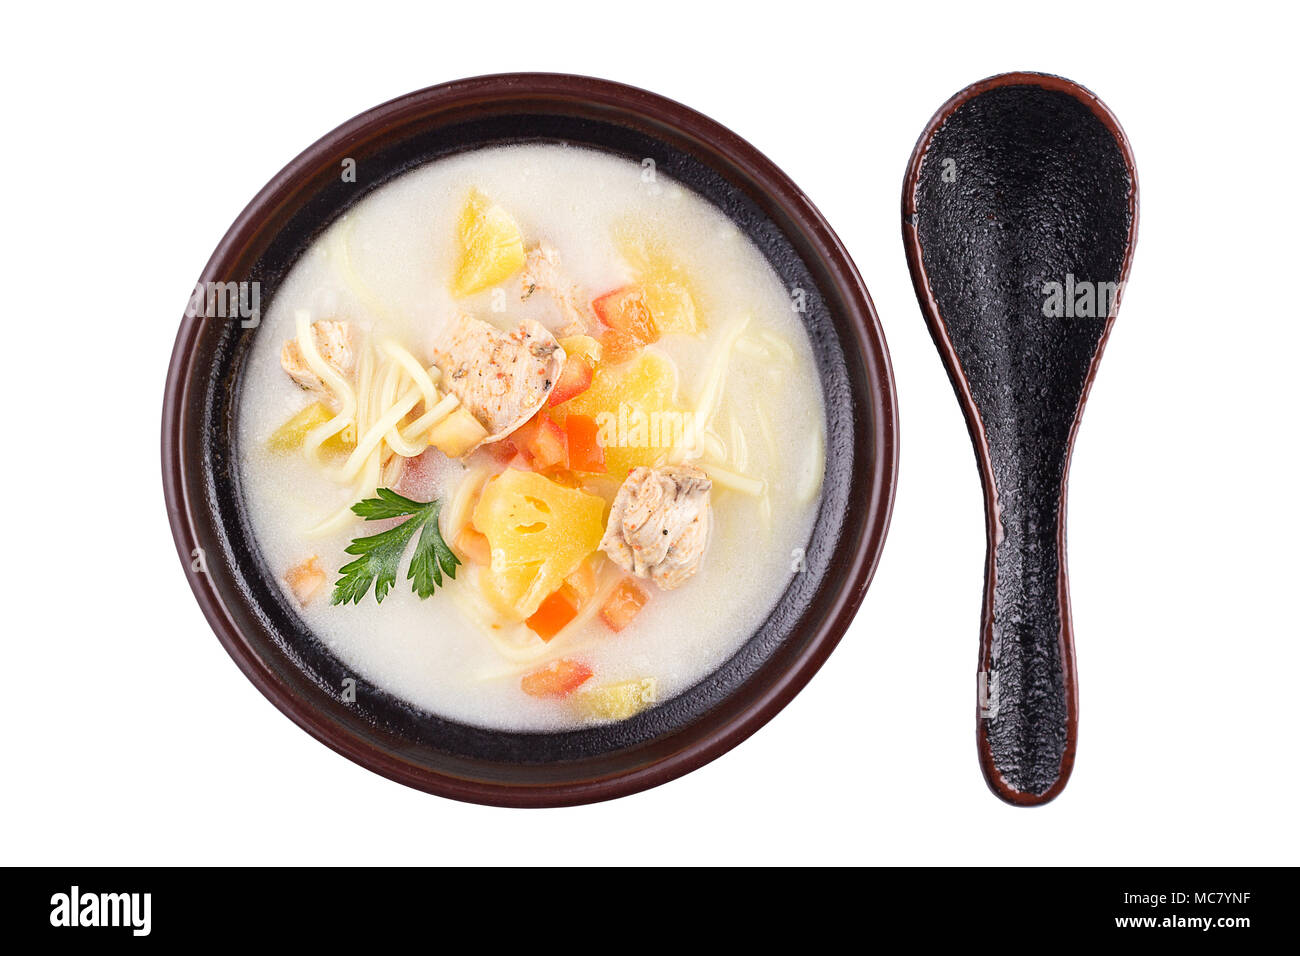 Delicious soup with meat and noodles. High angle view of Thai food - chicken and noodles in coconut milk soup isolated on white. Stock Photo